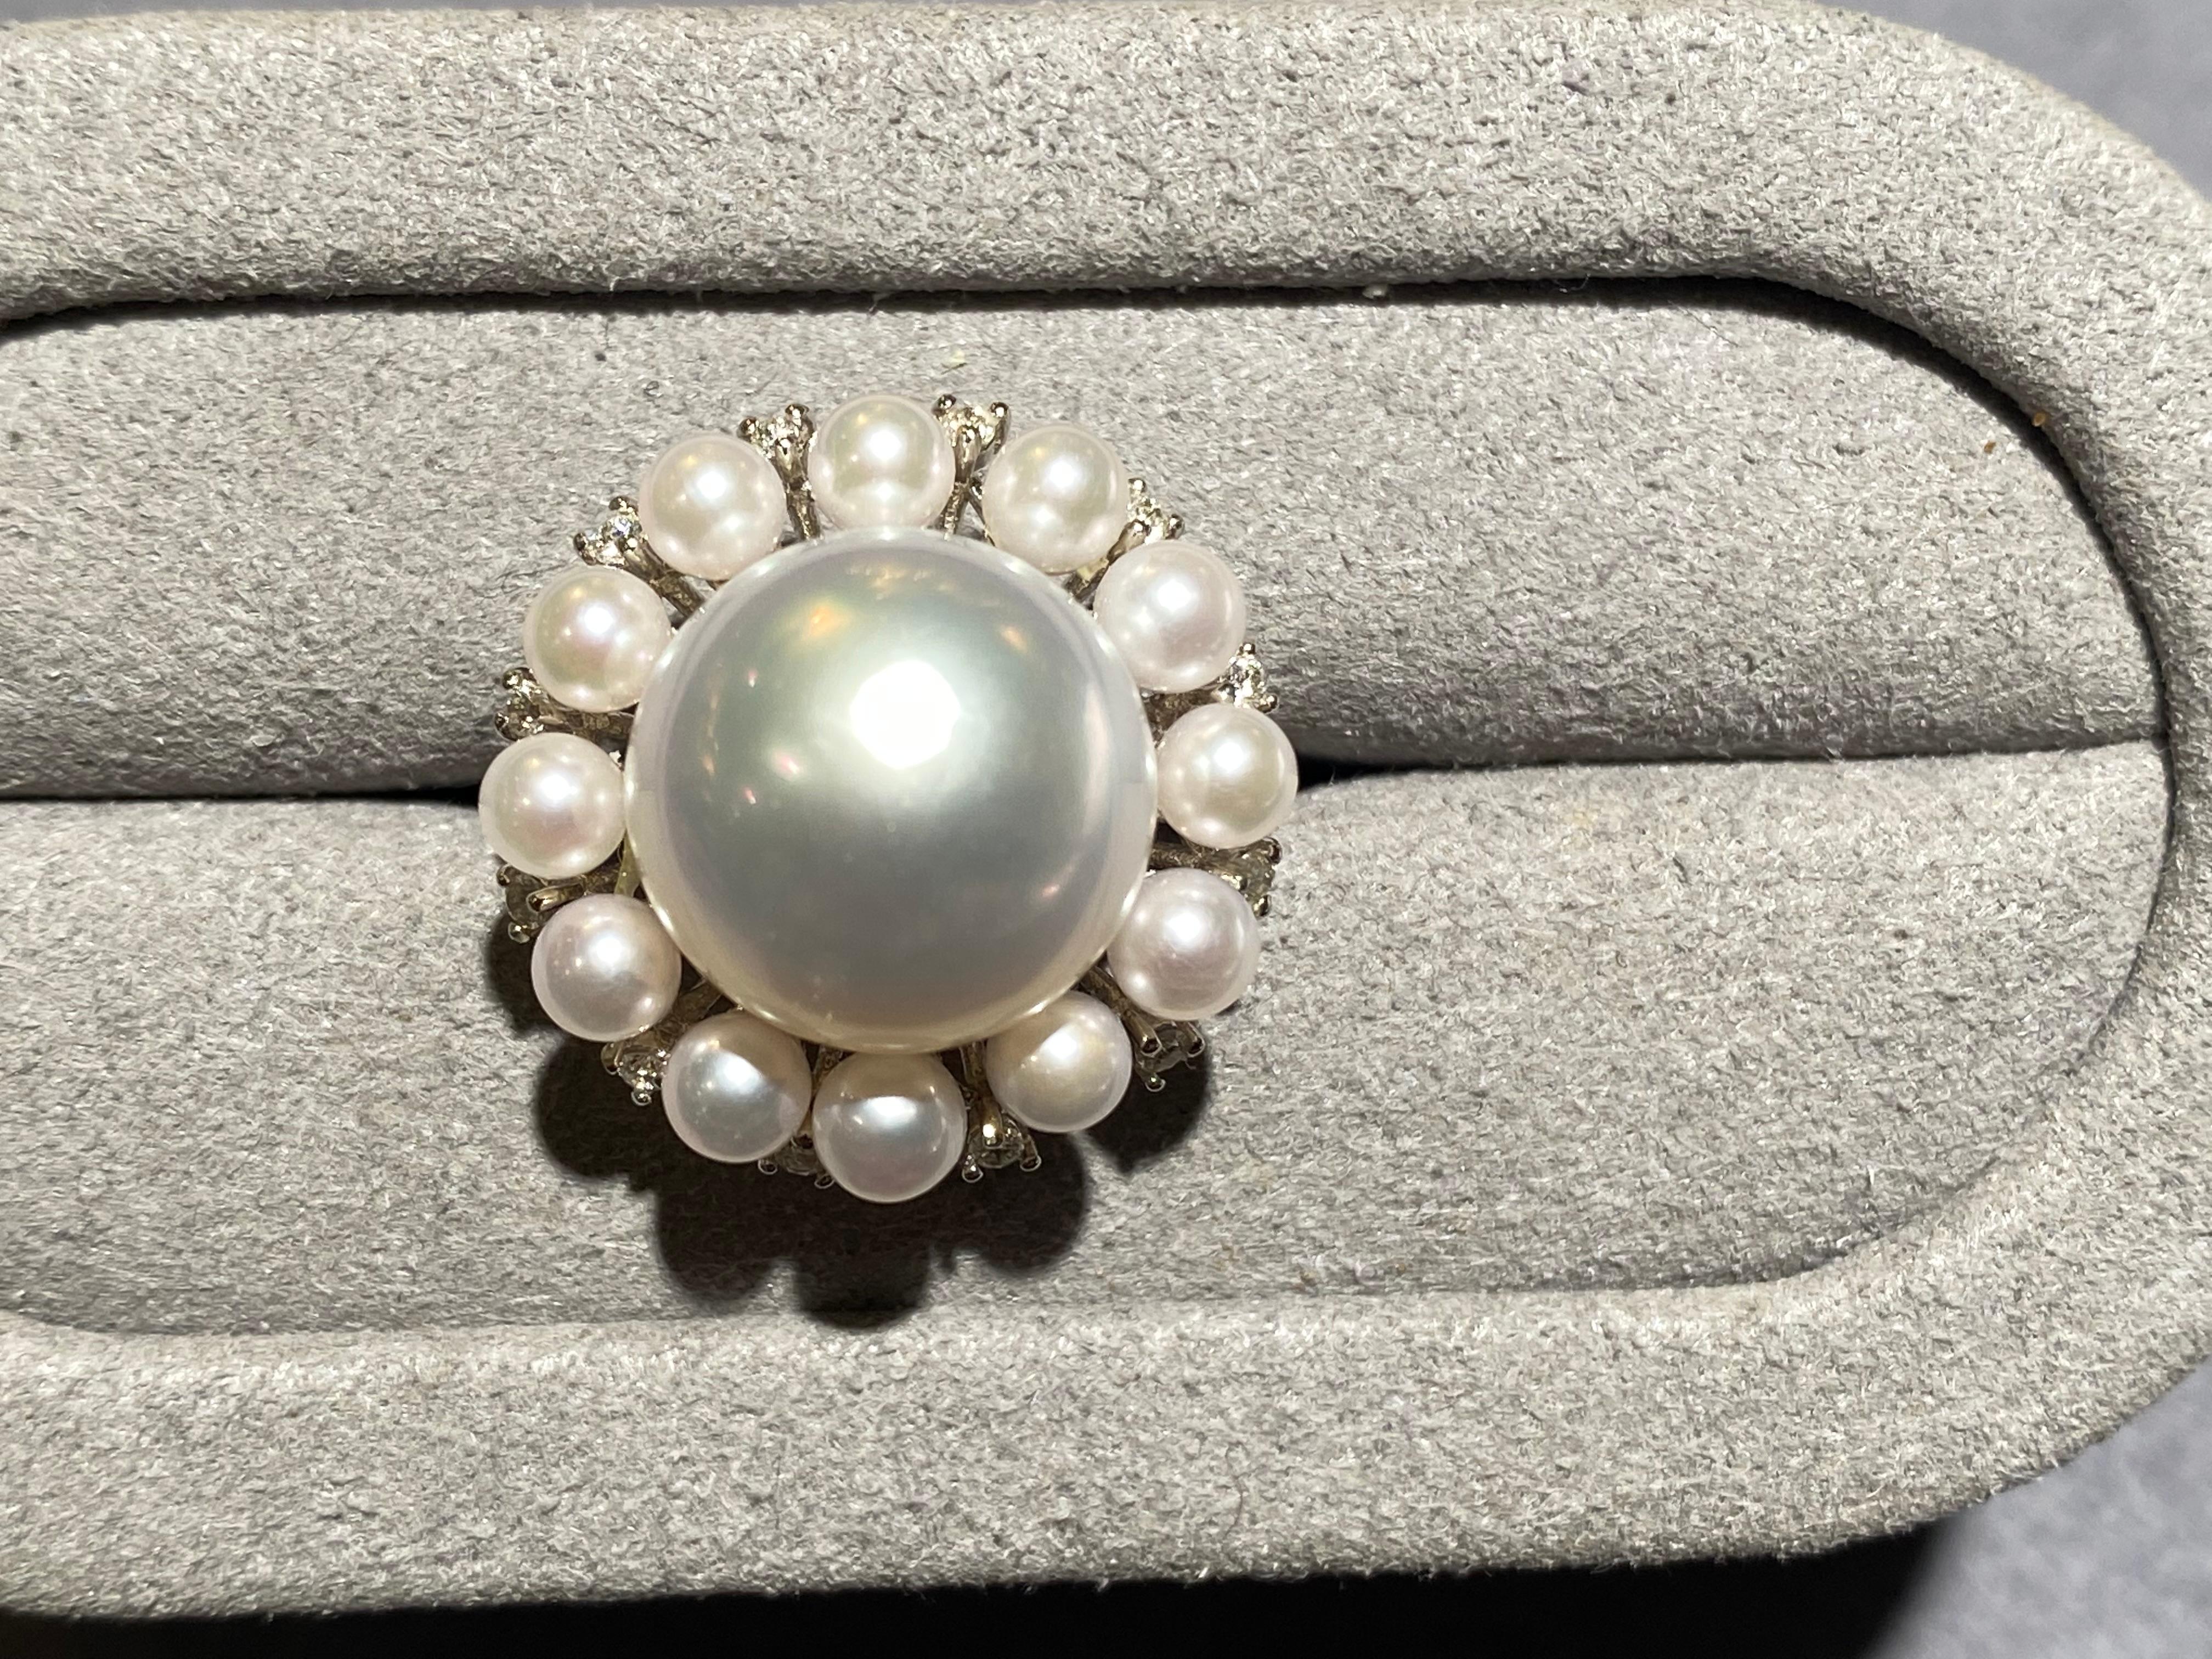 Al Majed Jewellery Ring in 18k Gold, South of Sea Pearls and